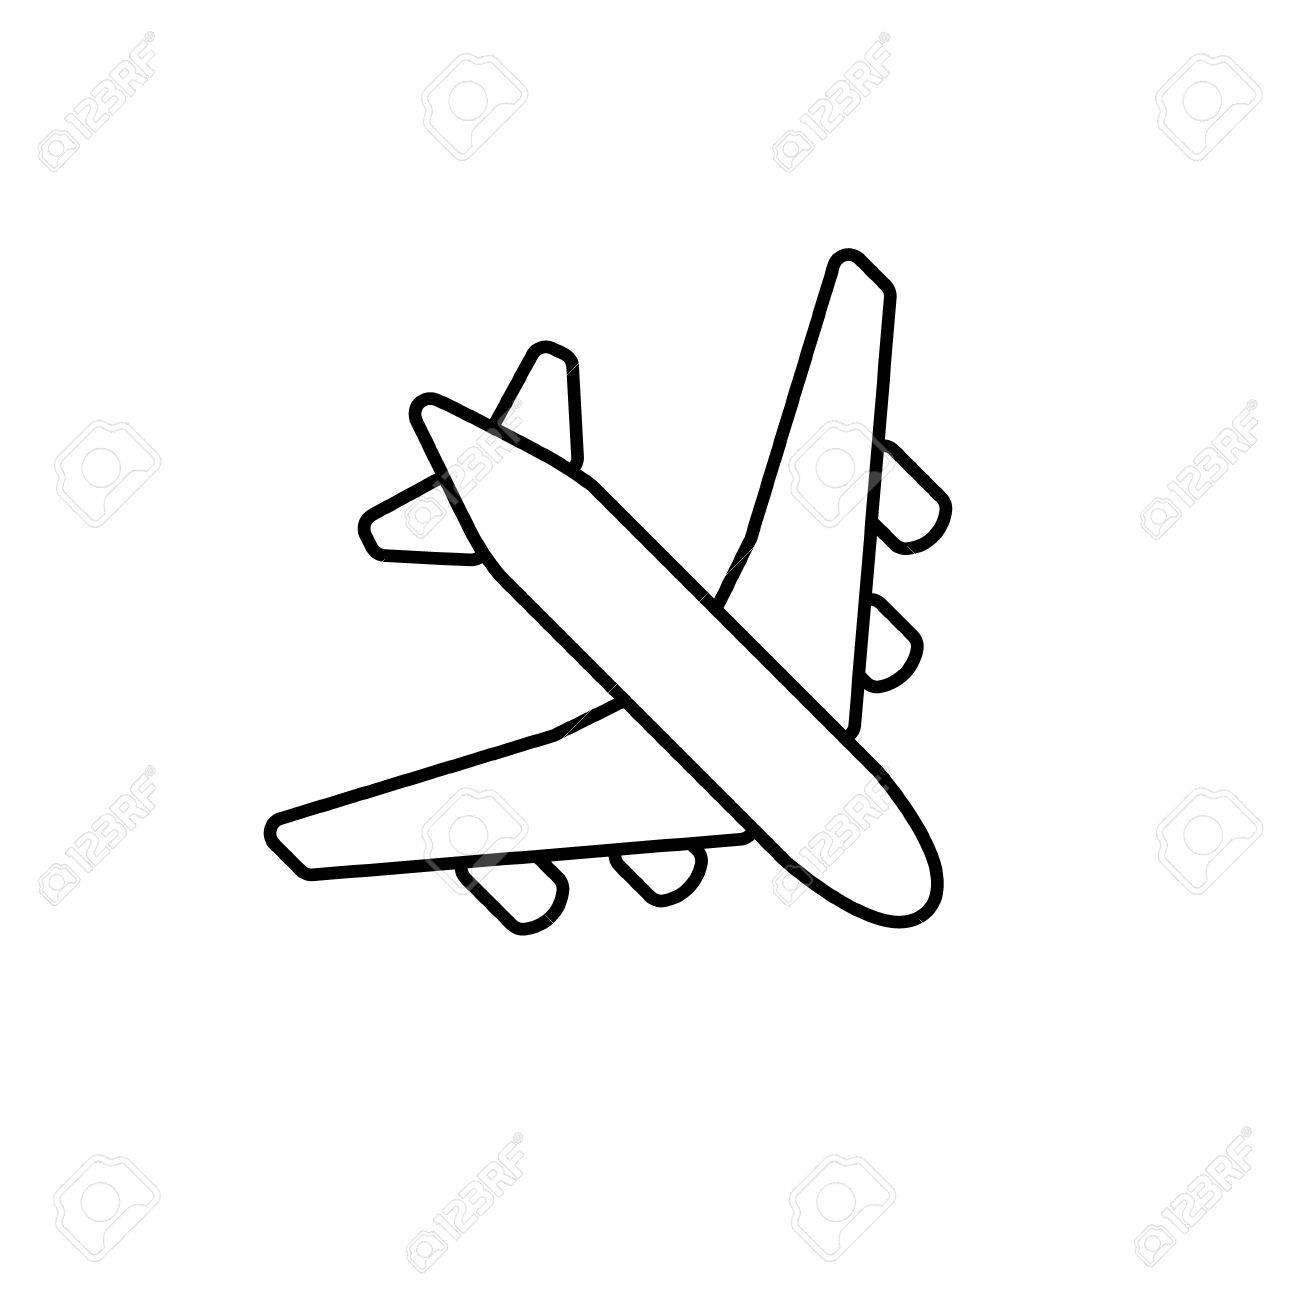 How to draw a simple airplane step by step - wirelessgasm